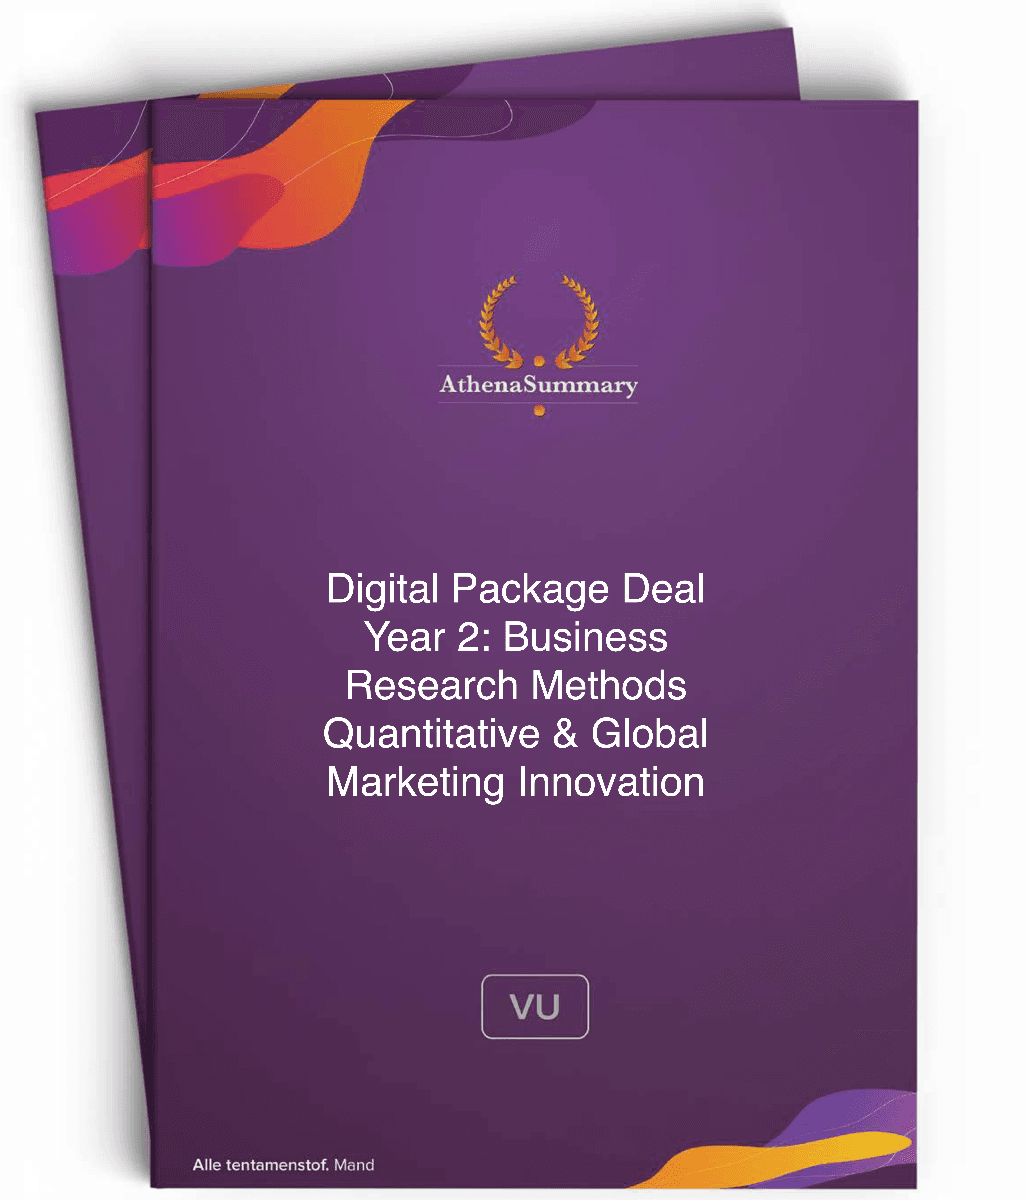 Digital Package deal Year 2: Business Research Methods Quantitative & Global Marketing Innovation